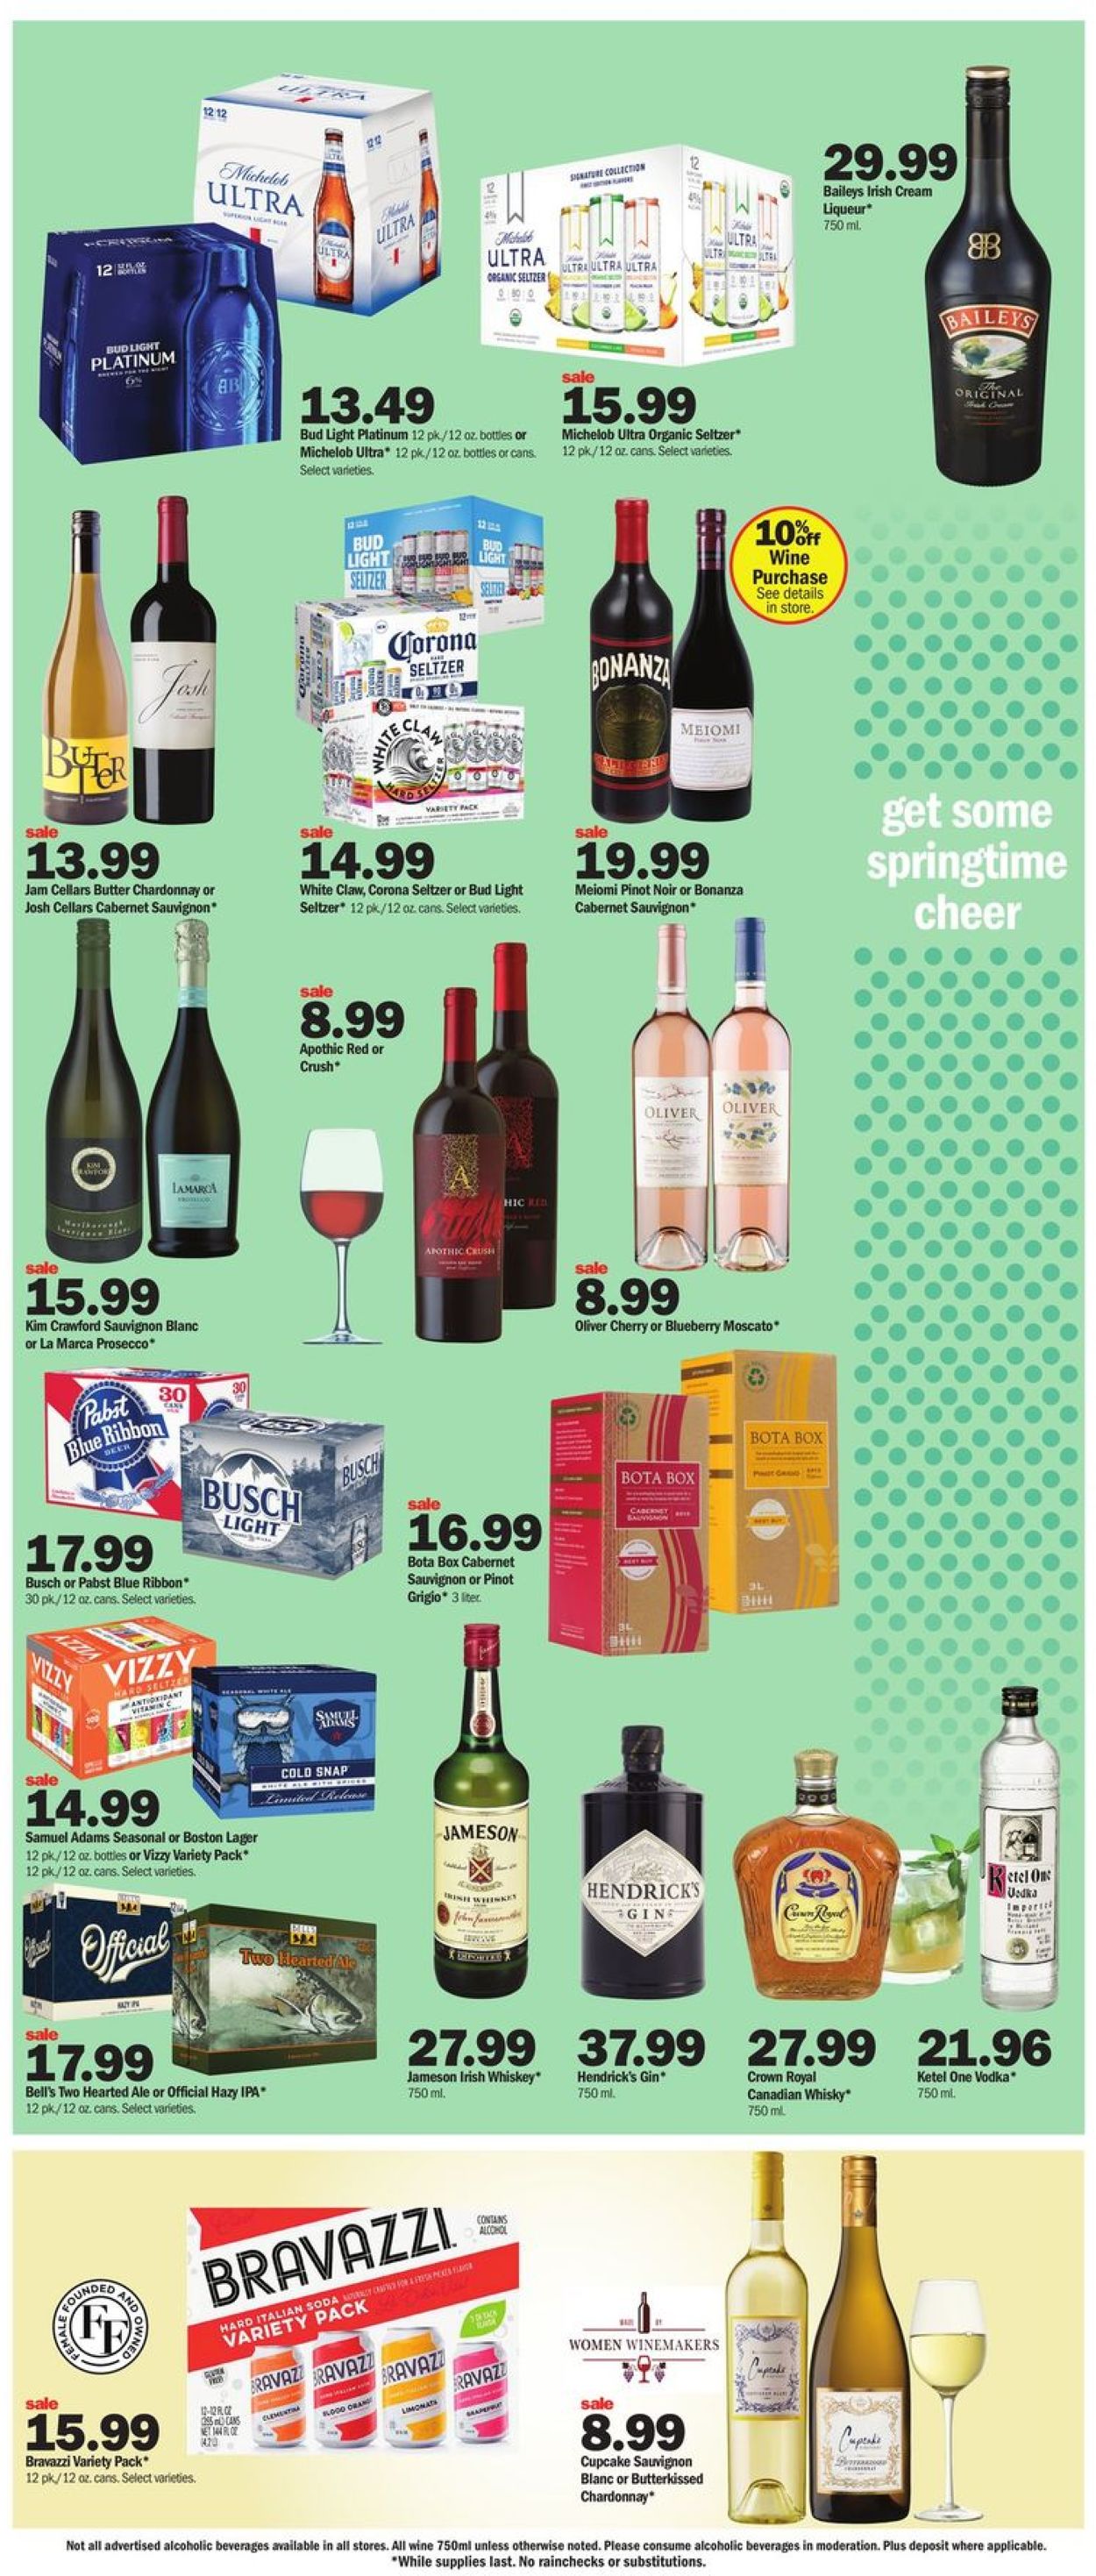 Meijer - Easter 2021 ad Weekly Ad Circular - valid 03/28-04/03/2021 (Page 12)